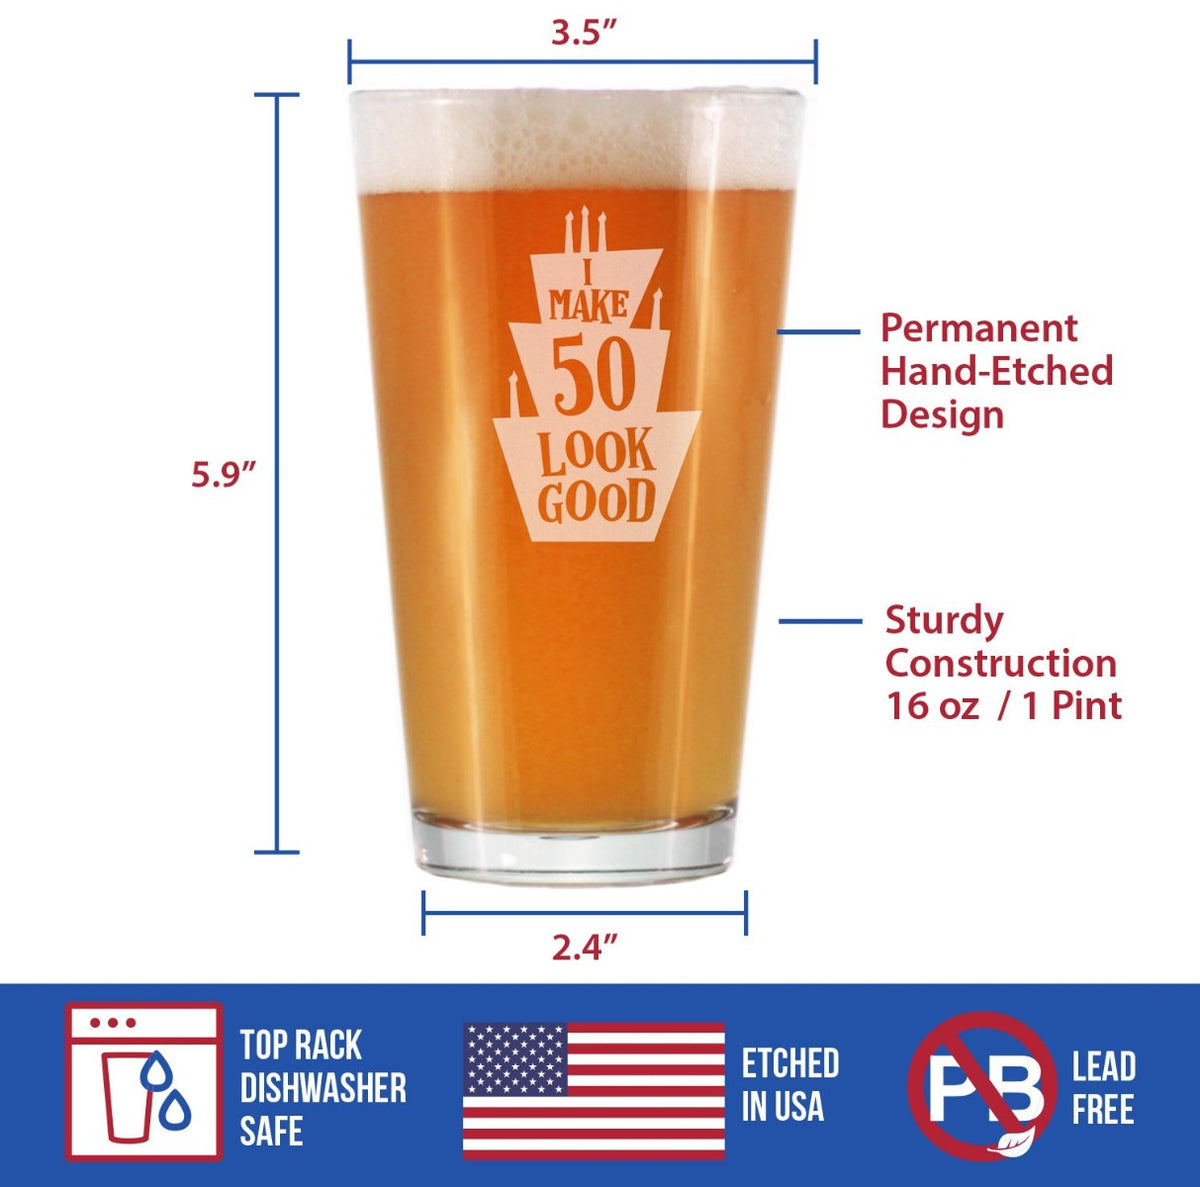 Make 50 Look Good - Funny 16 oz Pint Glass for Beer - 50th Birthday Gifts for Men or Women Turning 50 - Bday Party Decor